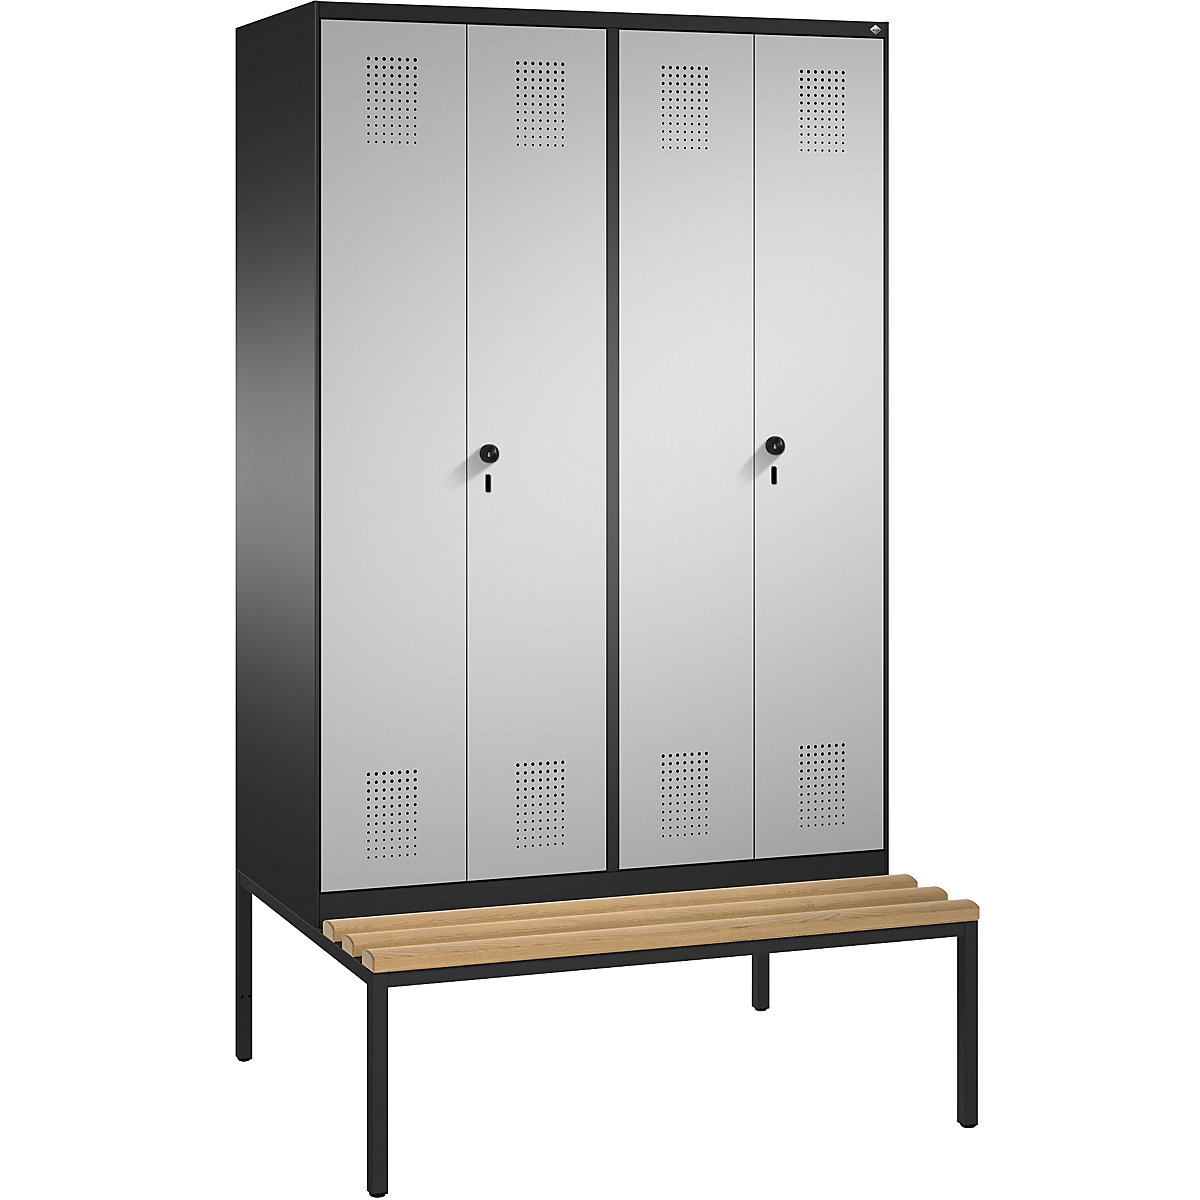 EVOLO cloakroom locker, doors close in the middle, with bench – C+P, 4 compartments, compartment width 300 mm, black grey / white aluminium-16